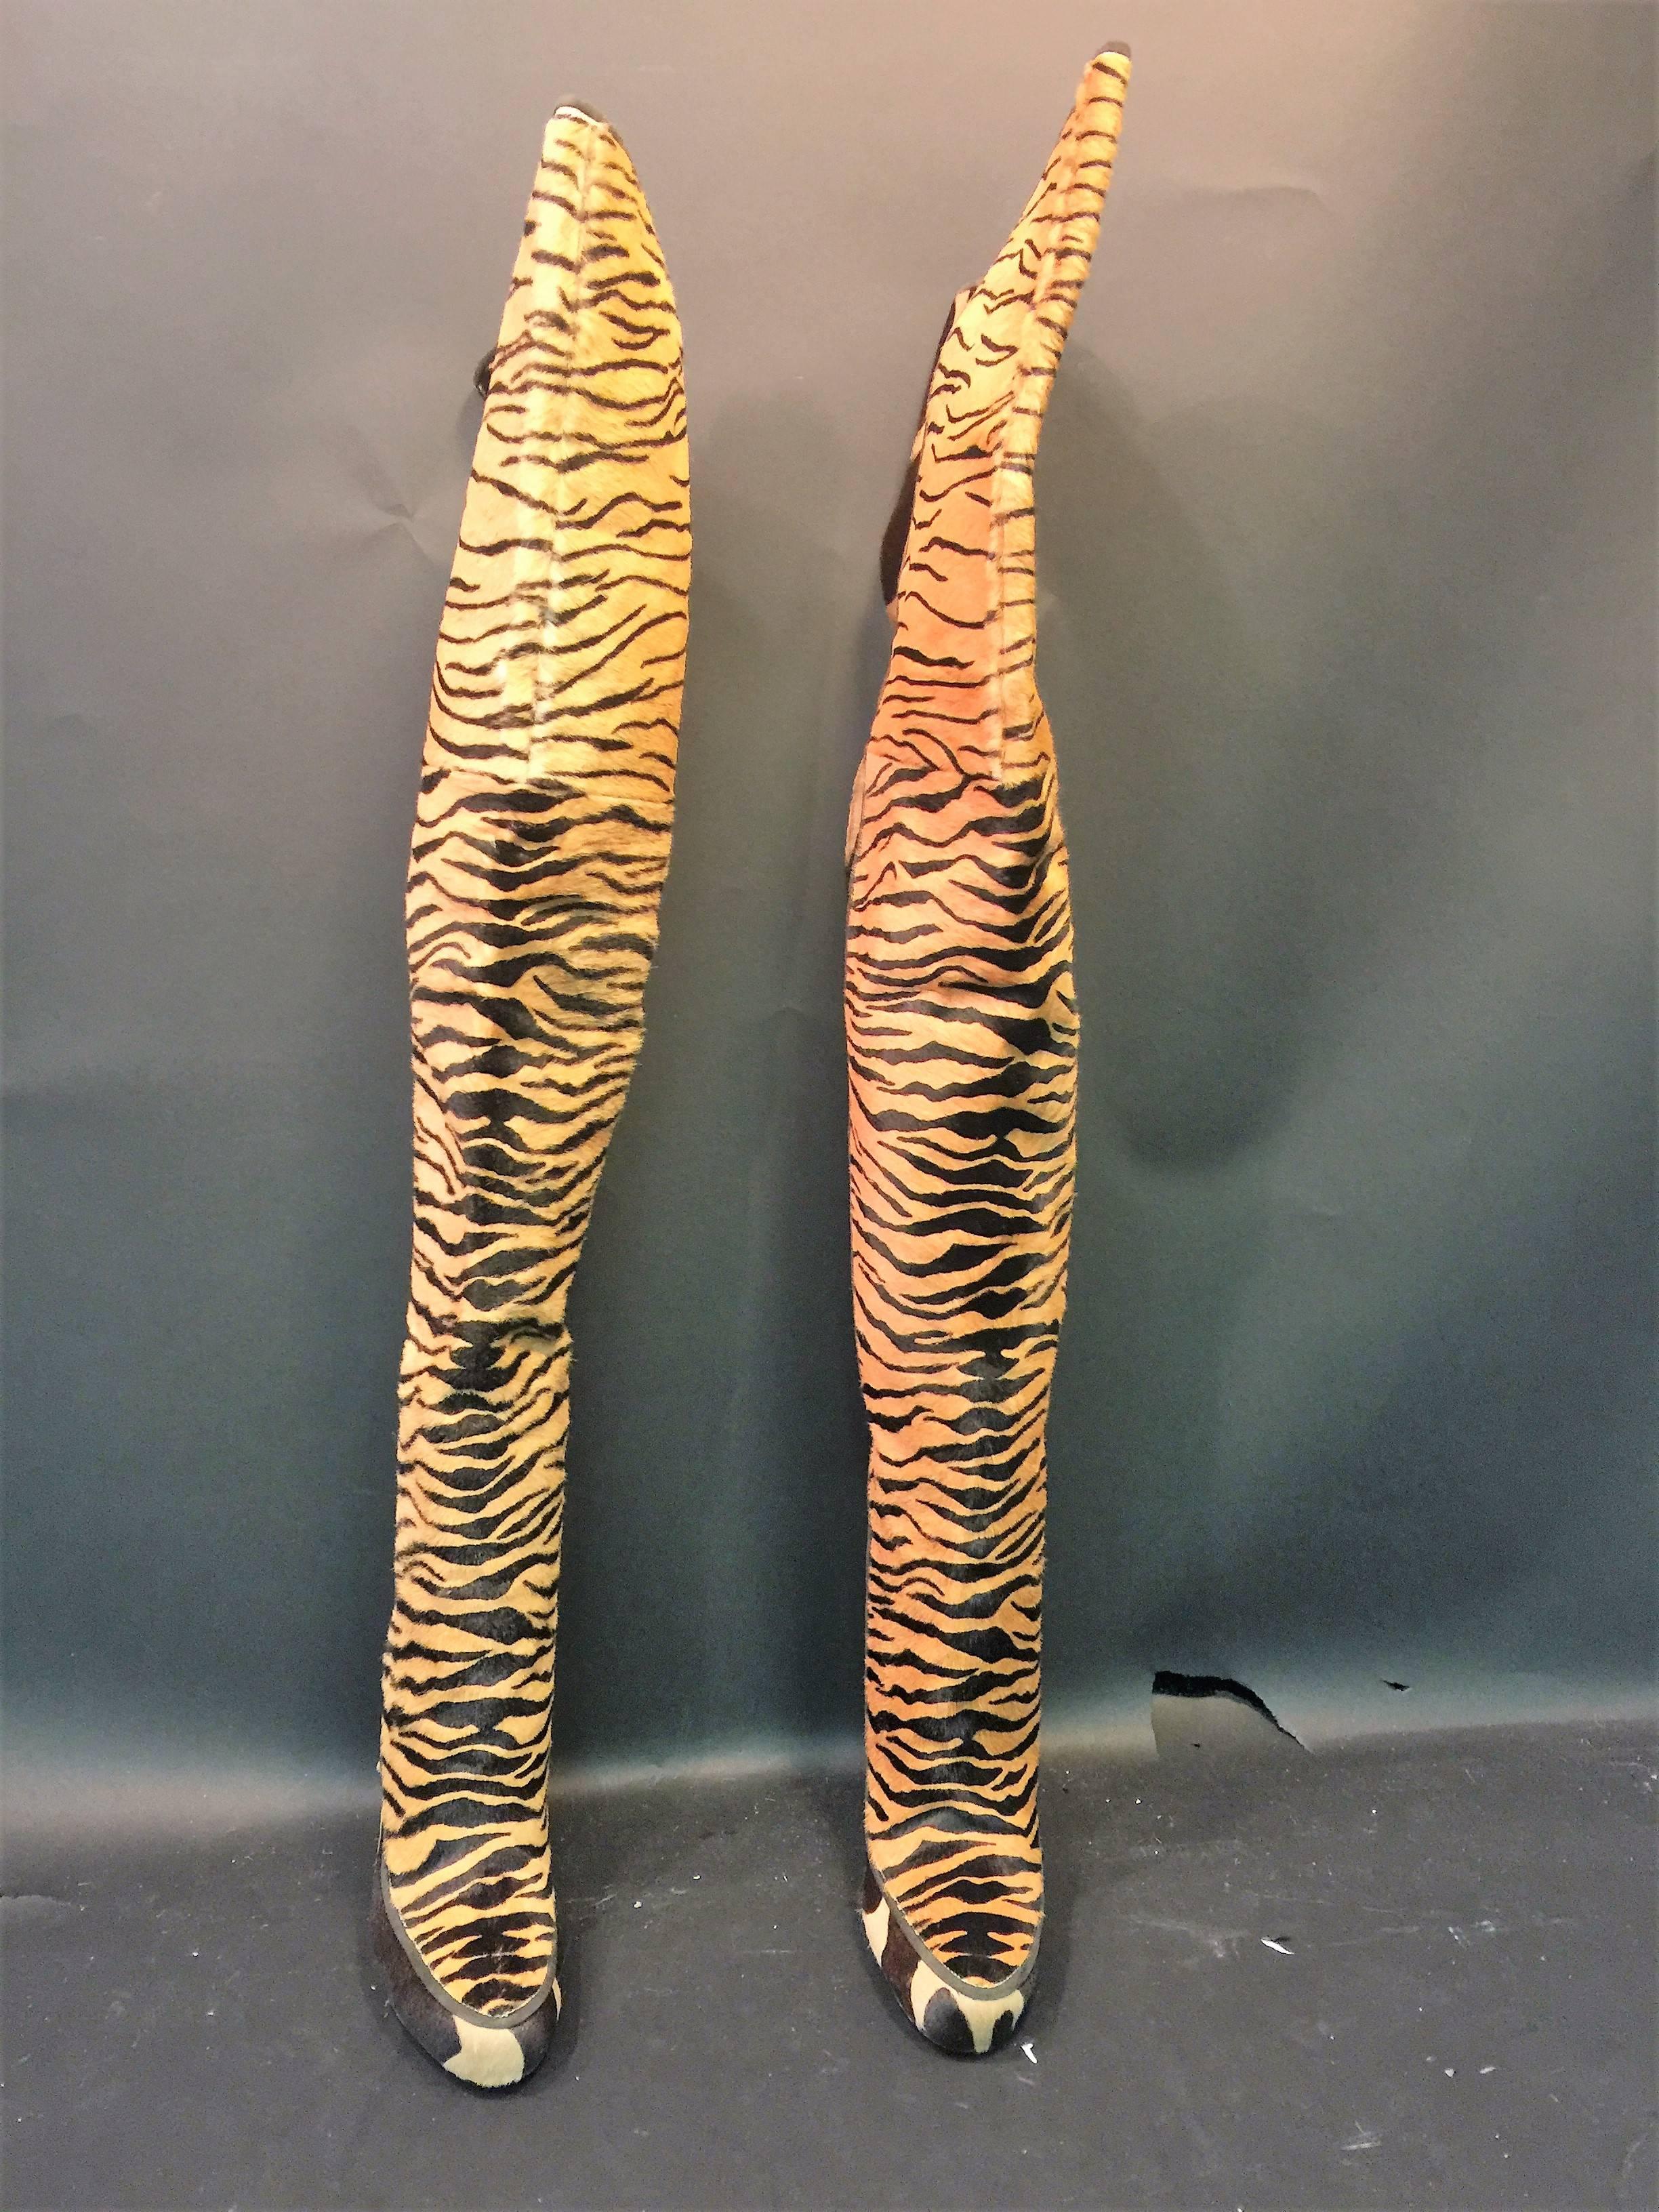 Amazingly Sexy Thigh High Boots Designed By Roberto Cavalli in Italy.These Incredible Black Stiletto Heel Boots are Patterned with Tiger Stripes and Giraffe Spots on Fur Hide.Lined in Luxe Chocolate Leather these were never worn and are a U.S. Size 9